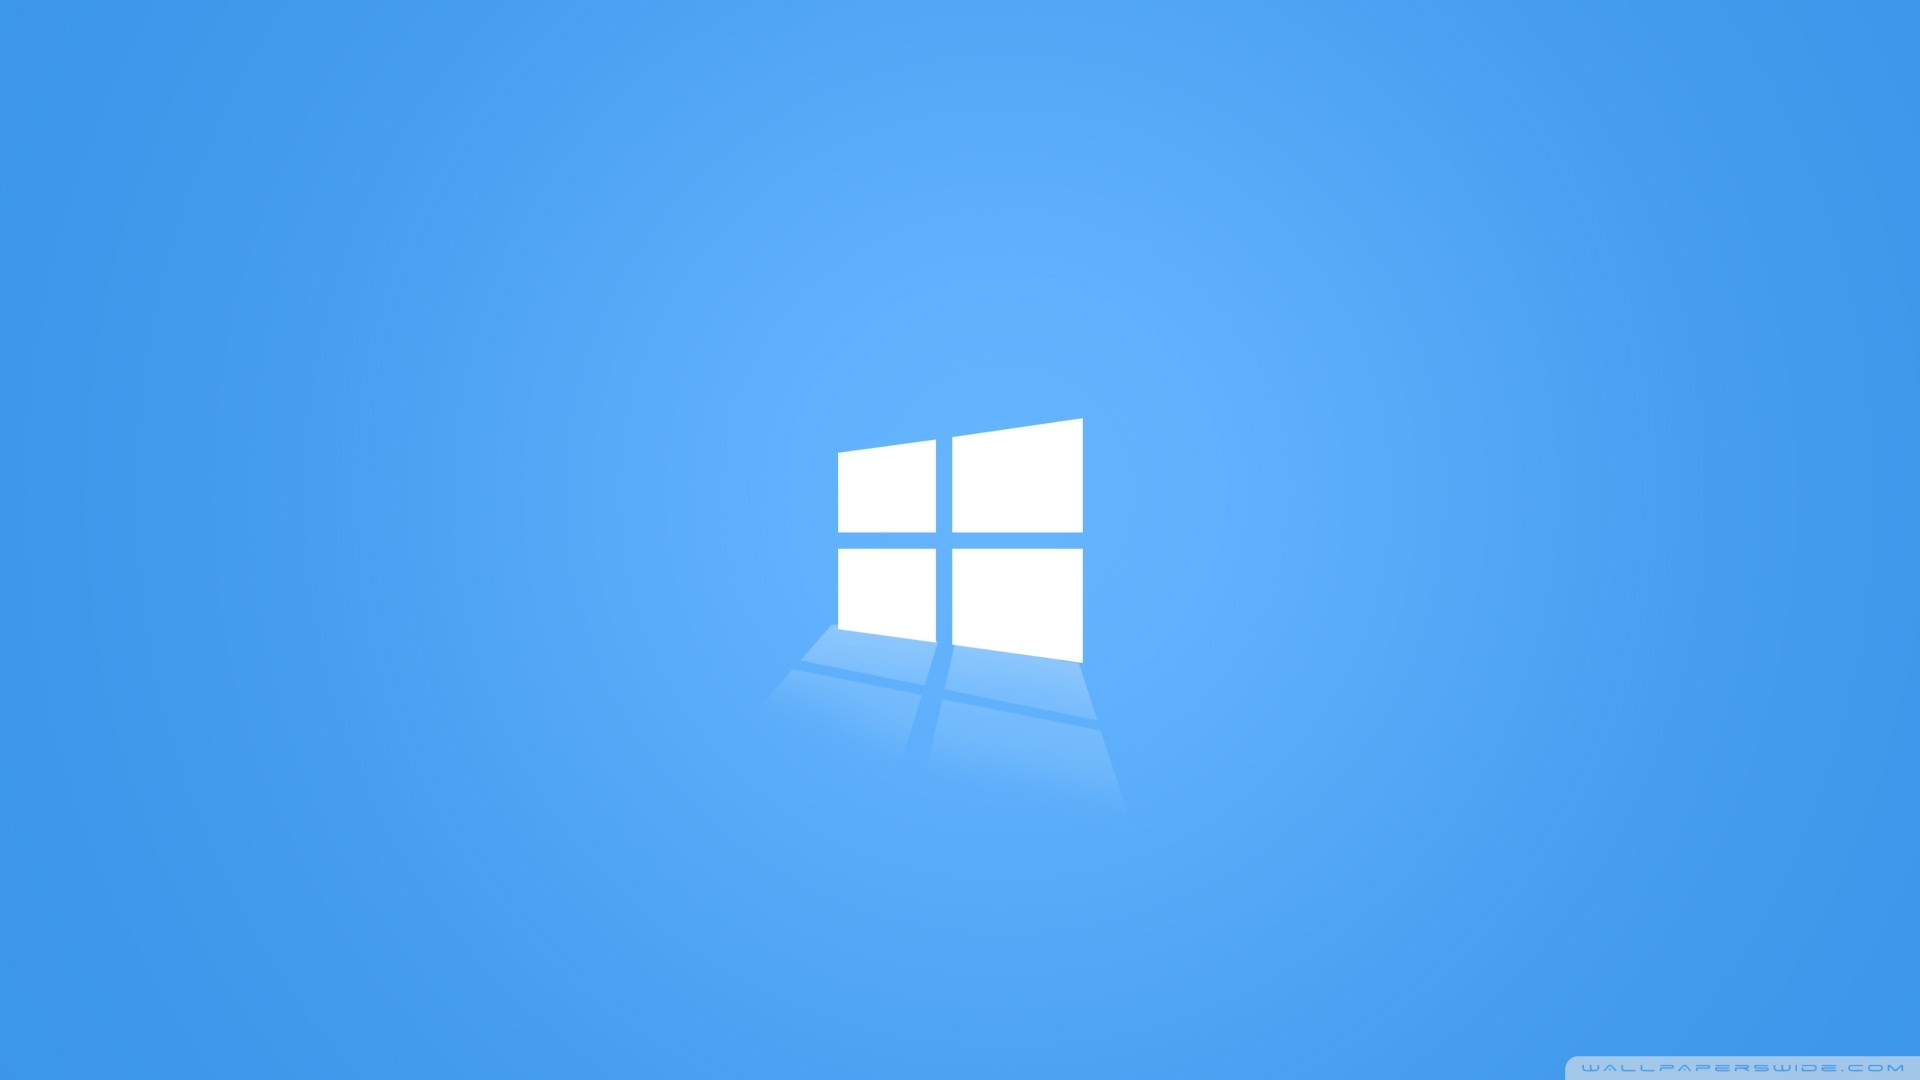 Windows 10 wallpaper HD ·① Download free cool full HD backgrounds for